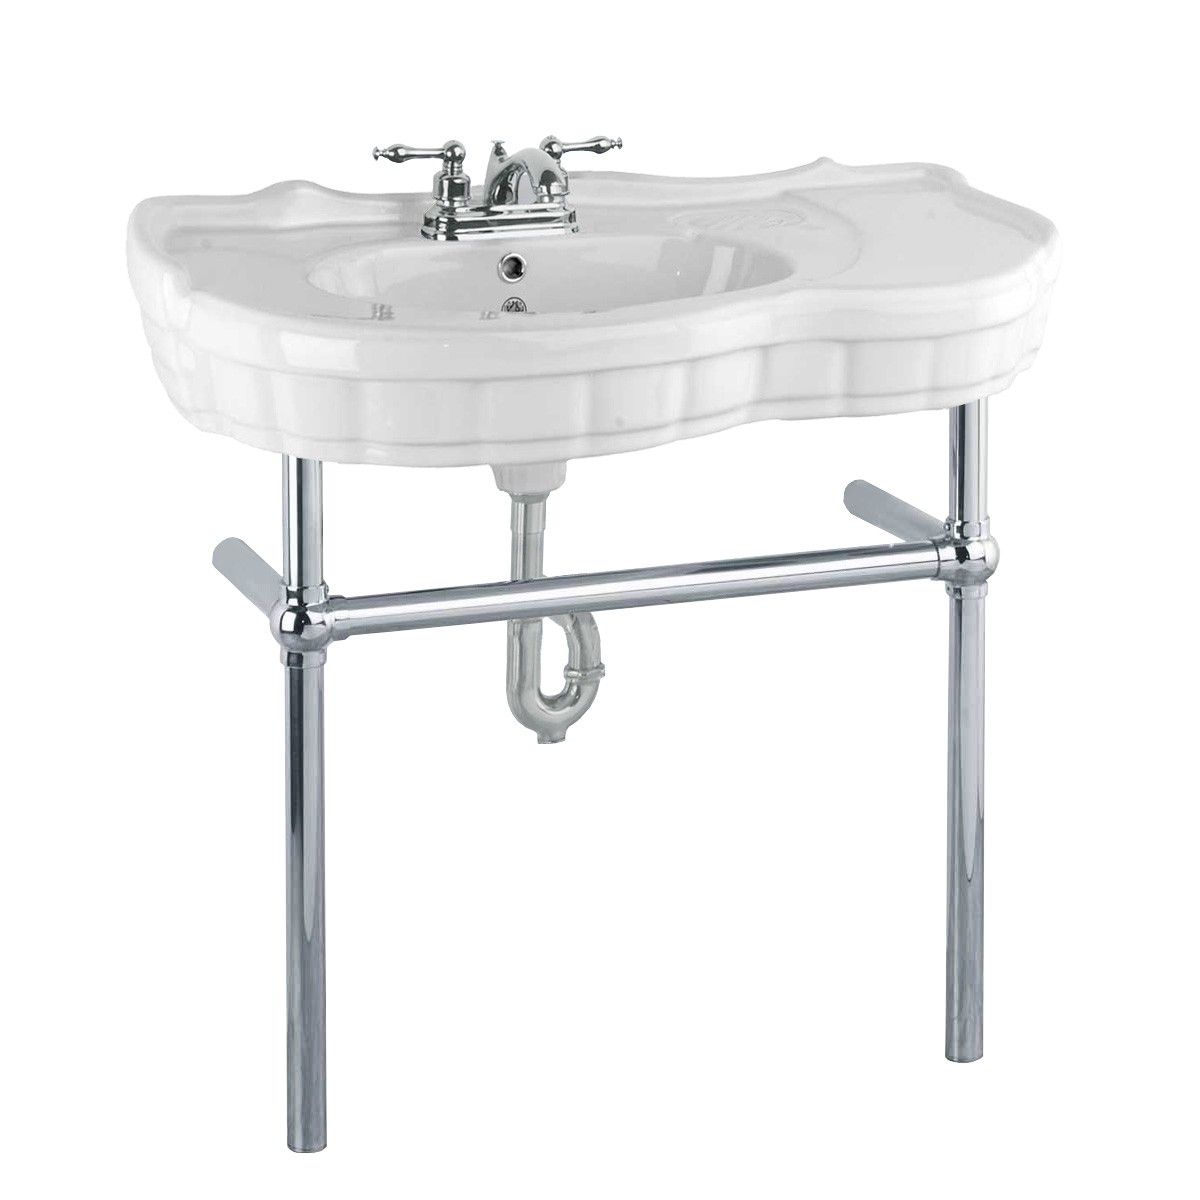 White Console Sink Porcelain Southern Belle With Chrome Bistro Legs Throughout White Porcelain And Chrome Wall Mirrors (View 13 of 15)